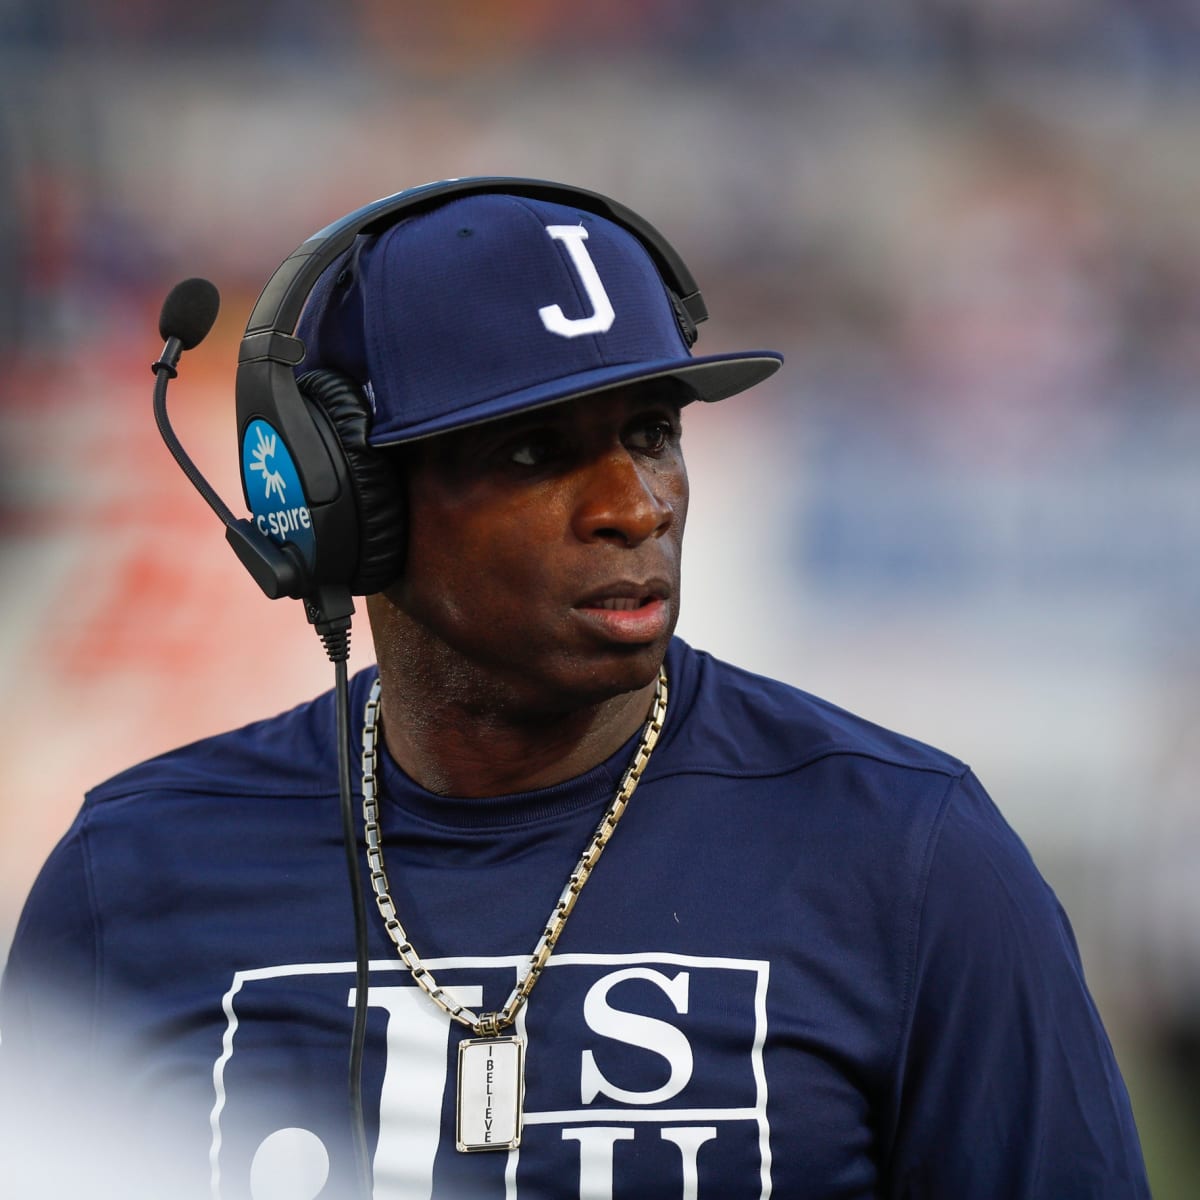 Prime Time comes to the Pac-12: Deion Sanders accepts Colorado HC job